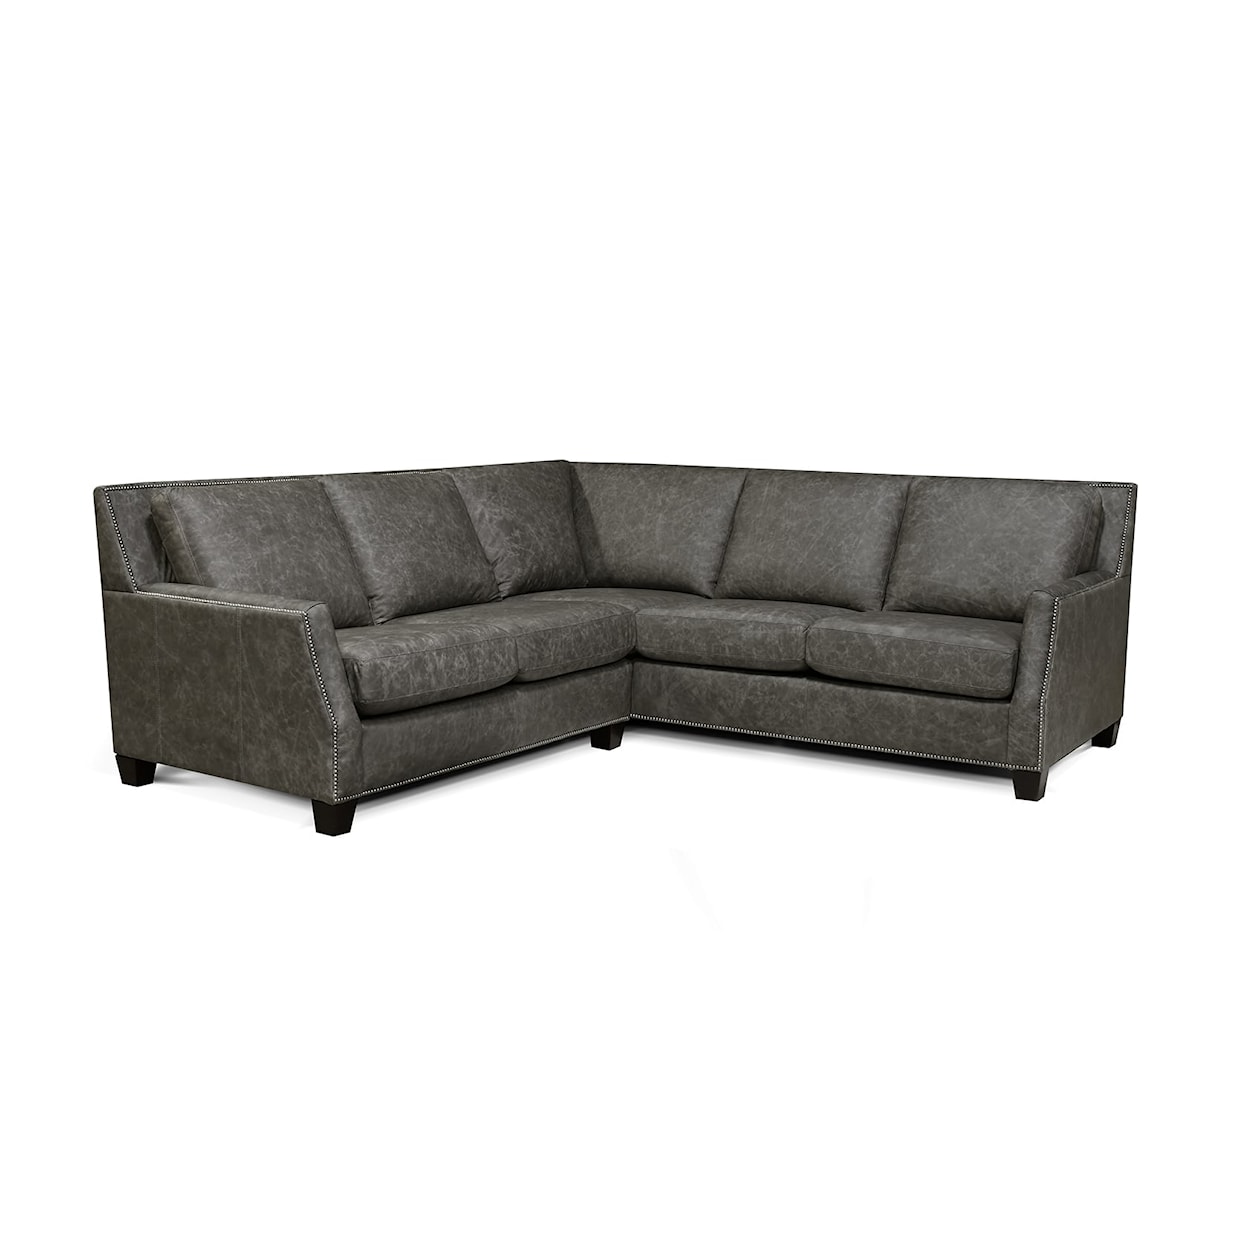 Dimensions 3G00/AL/N Series 2-Piece Leather Sectional Sofa